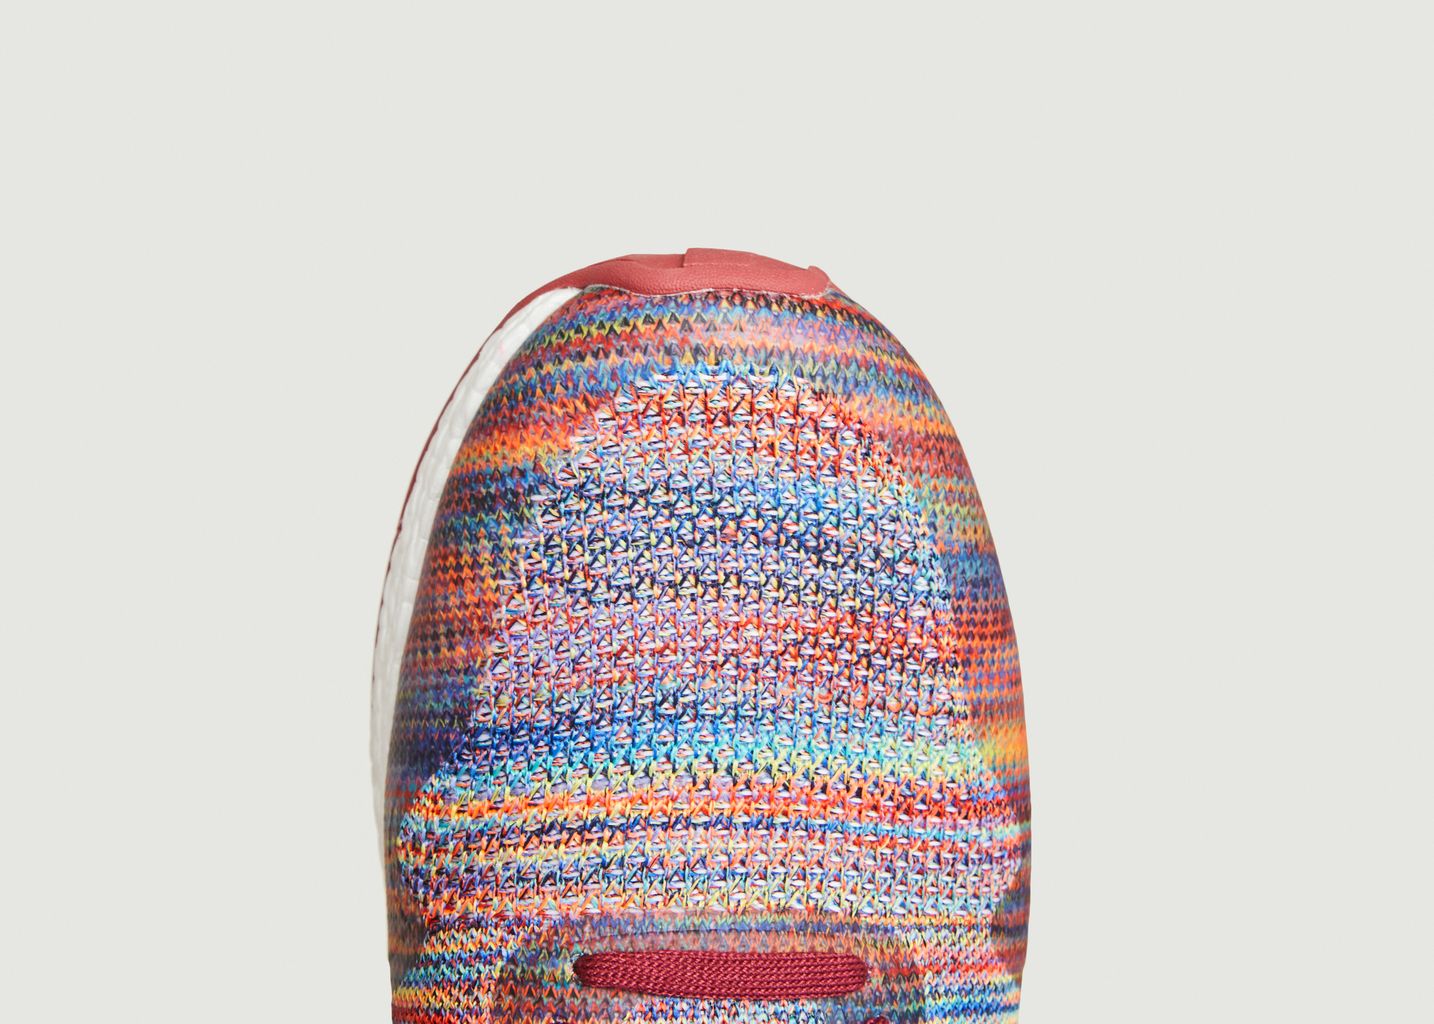 Baskets Krios en polyester recyclé - PS by PAUL SMITH